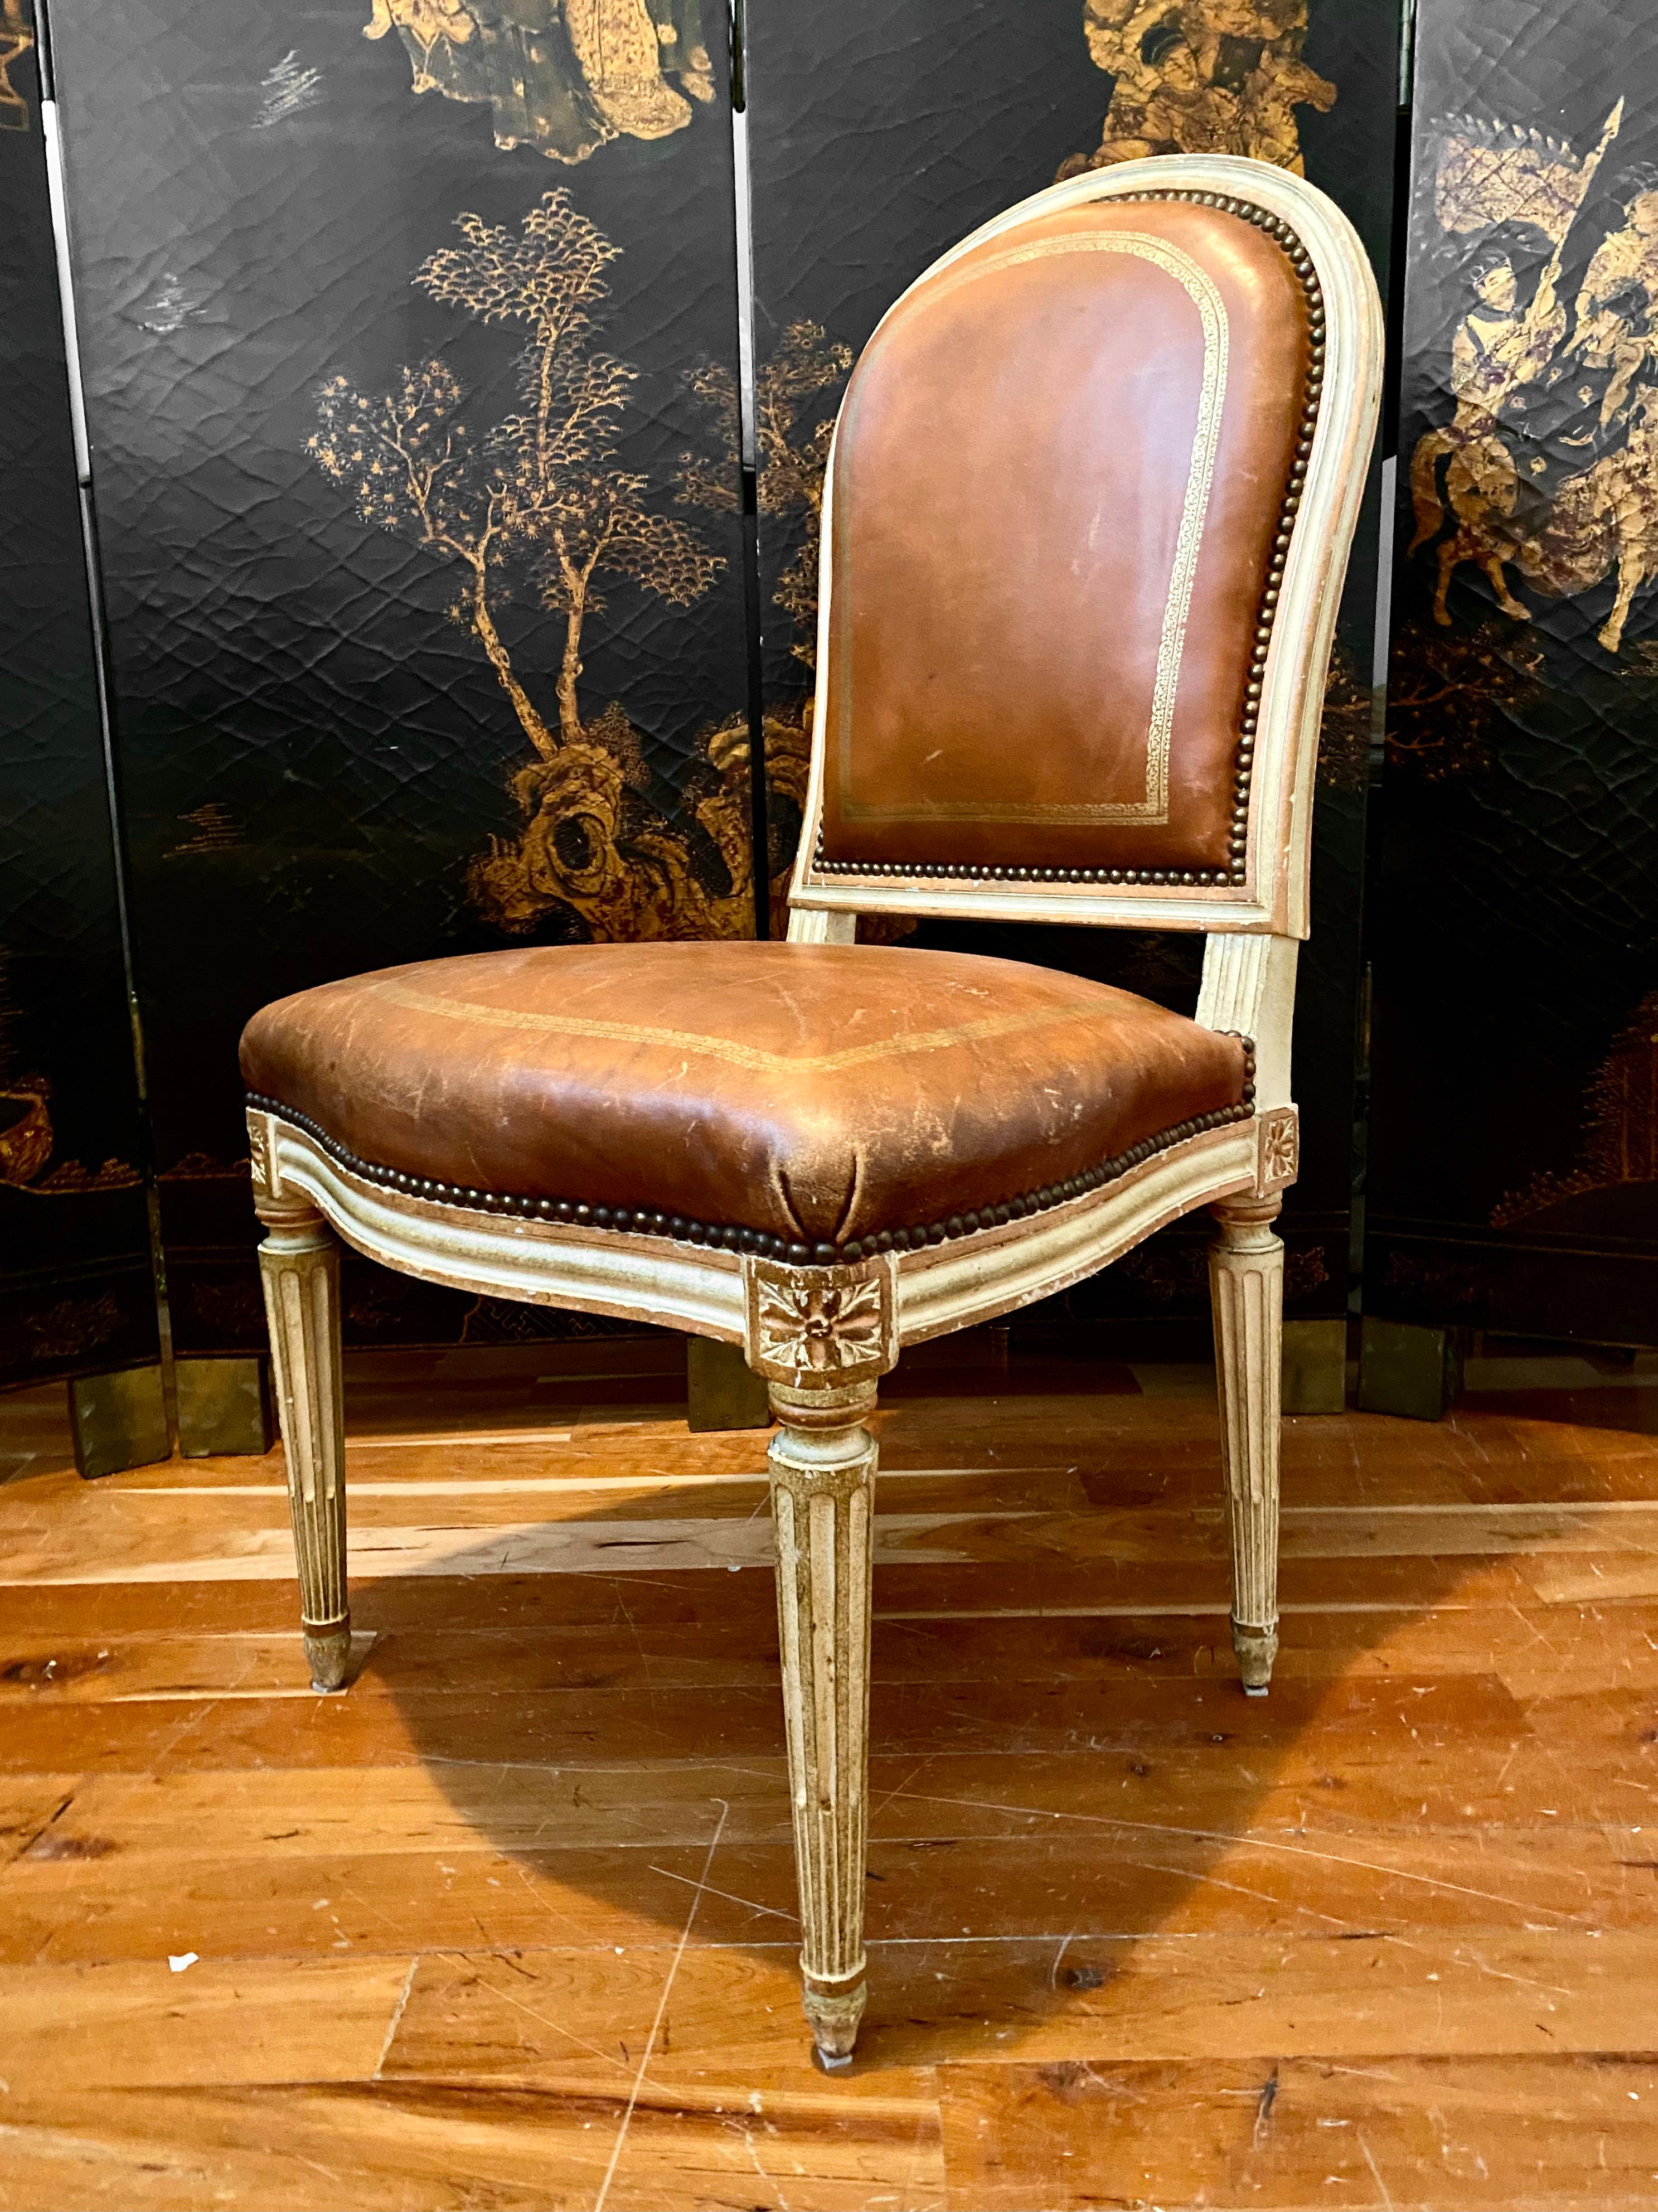 19th Century French Louis XVI Style Chair, Tooled and Gilt Leather